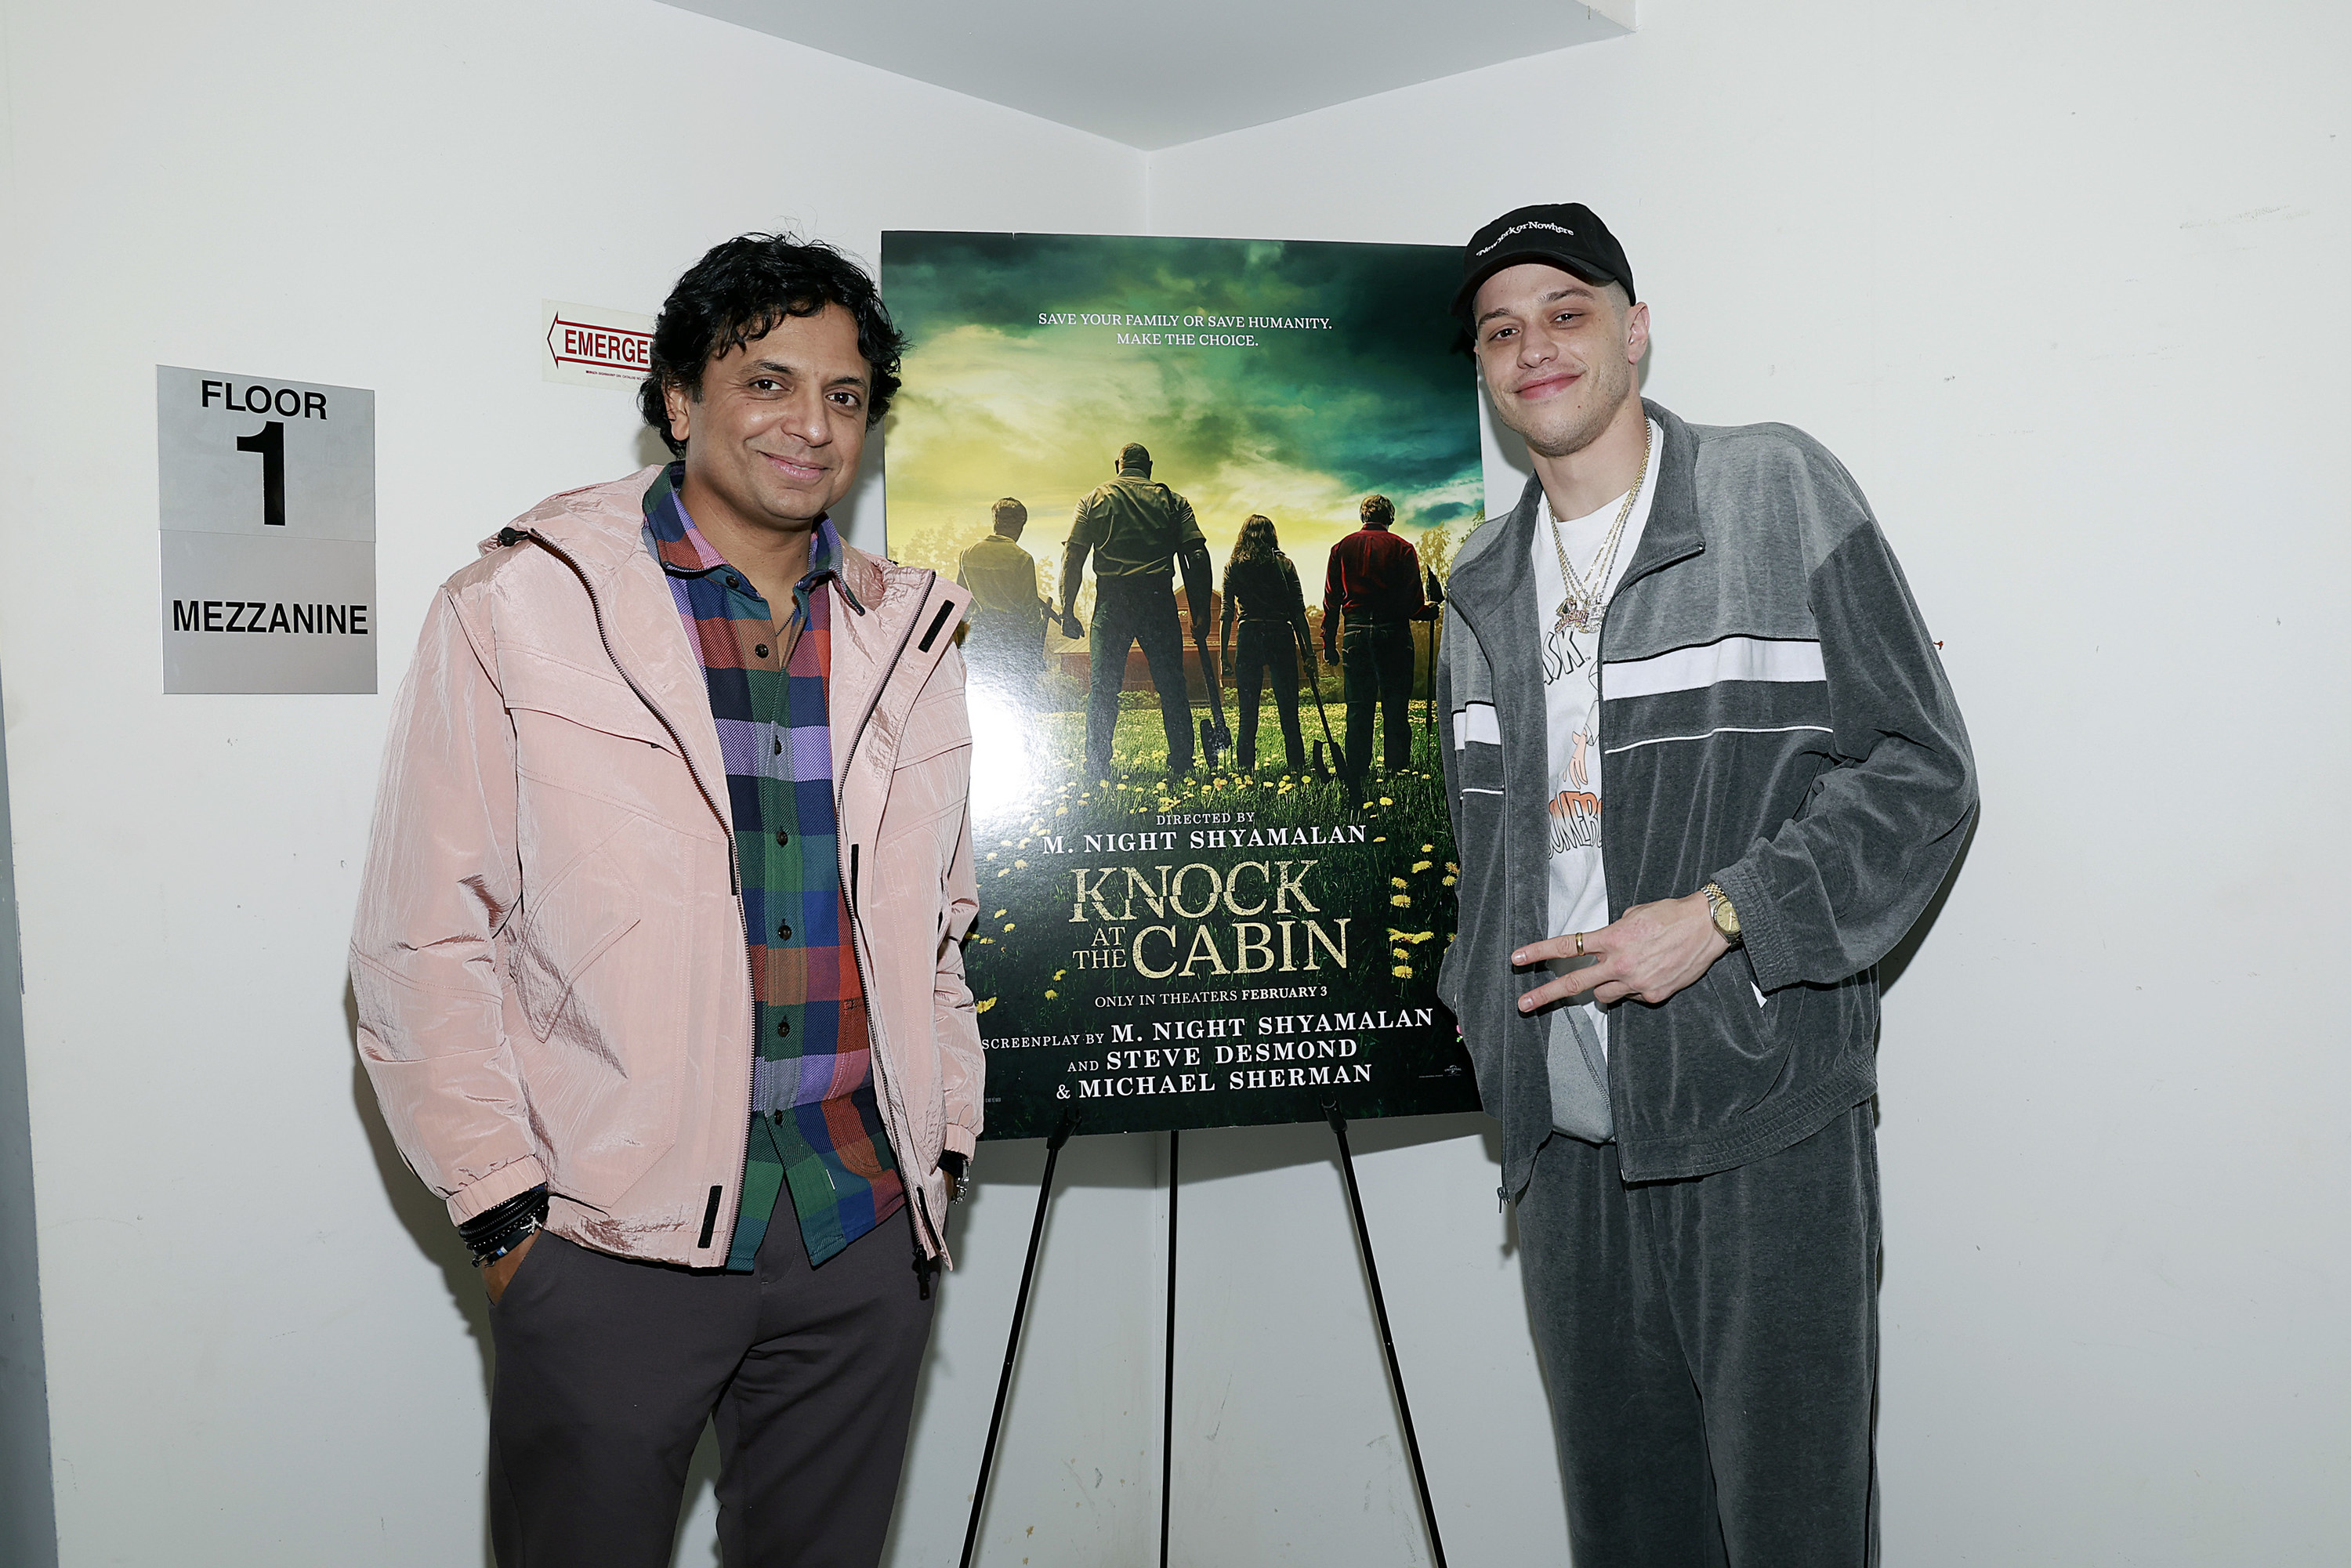 M. Night Shyamalan and Pete stand next to a poster for Shyamalan&#x27;s film &#x27;Knock at the Cabin&#x27;. Pete is wearing a baseball cap